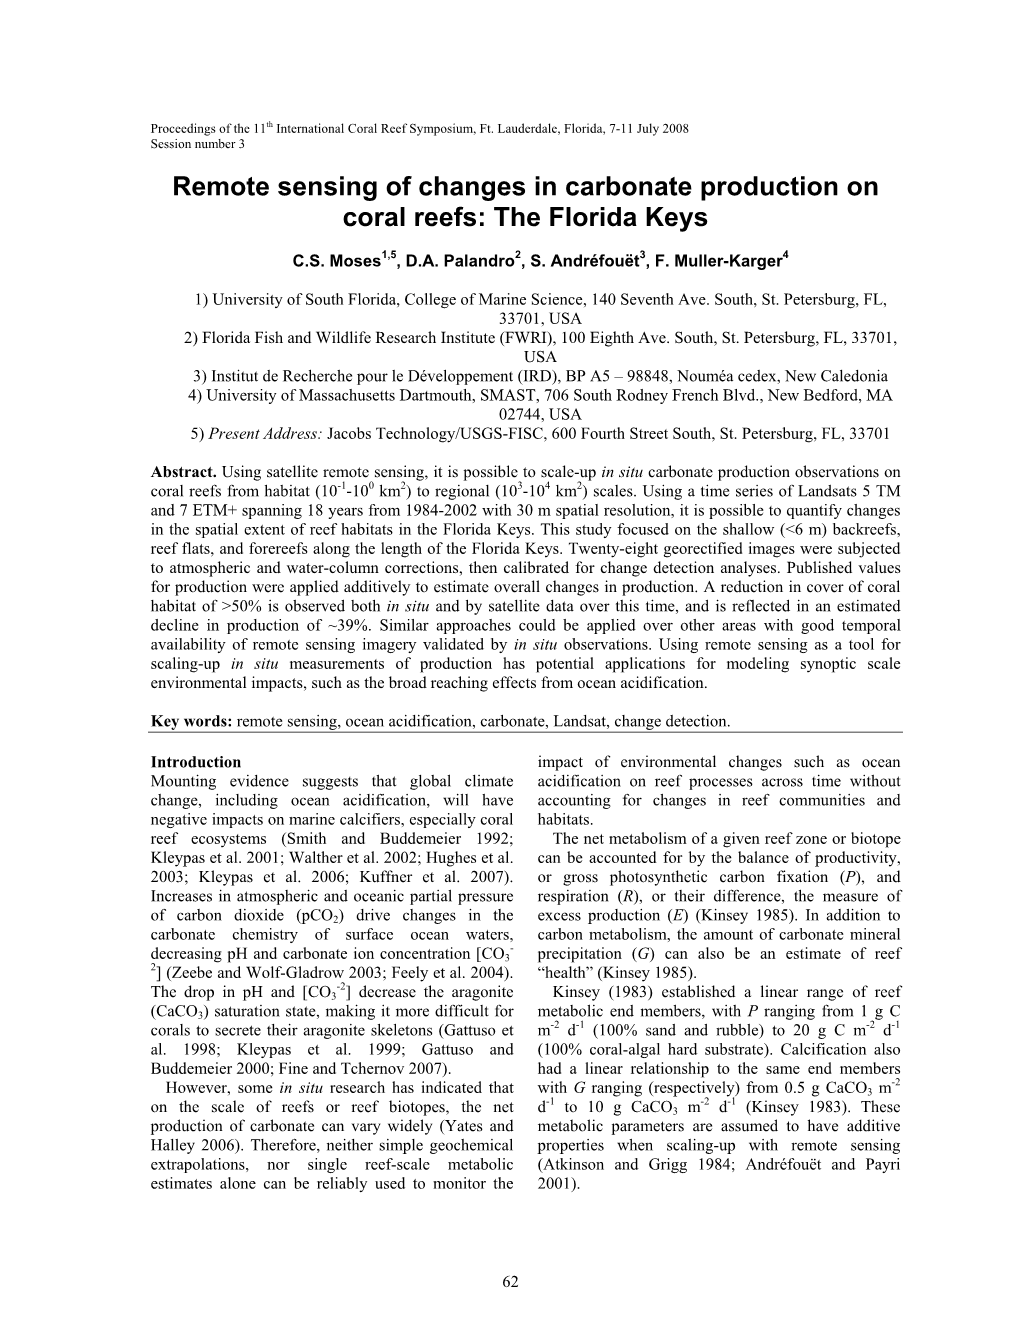 Remote Sensing of Changes in Carbonate Production on Coral Reefs: the Florida Keys